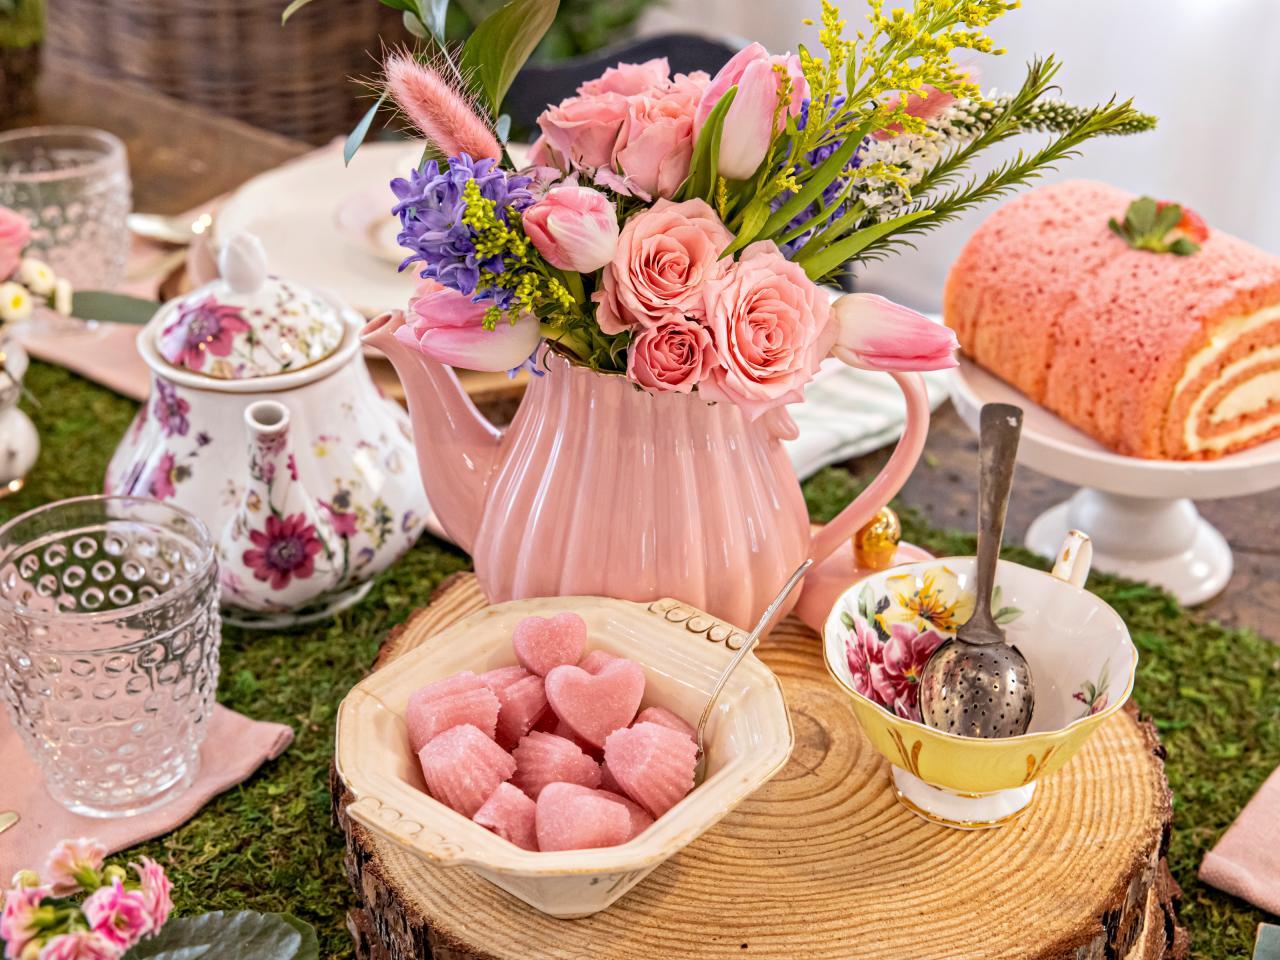 11+ Best Tea Party Table Ideas & Themes For Spring That Your Guests Will Love (& Share On Instagram)